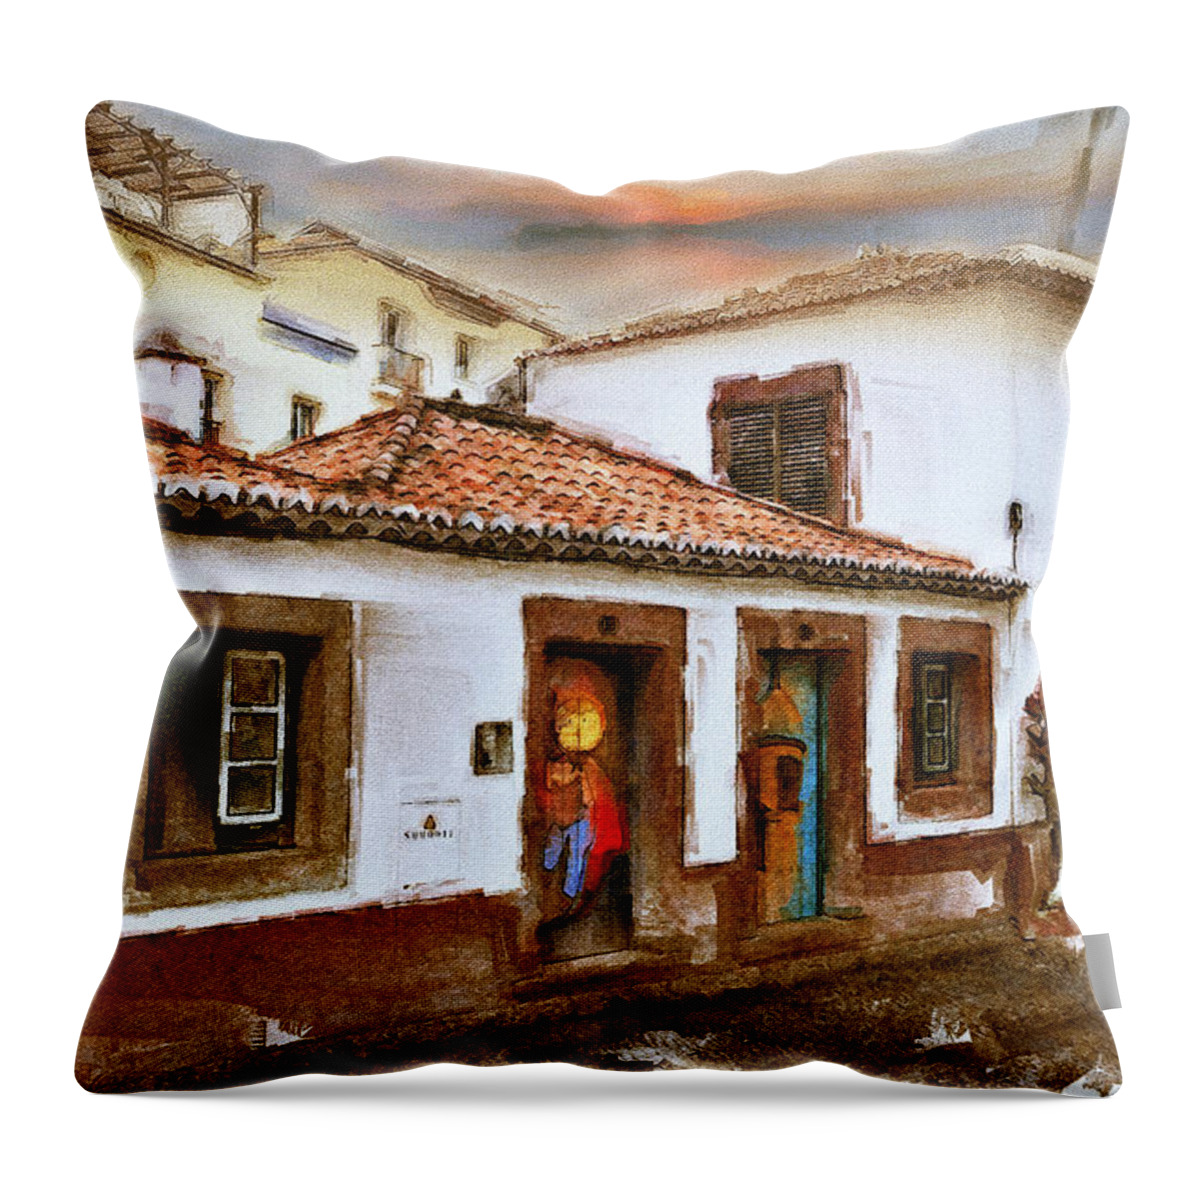 Funchal Throw Pillow featuring the digital art Funchal by Rinaldo Mendes